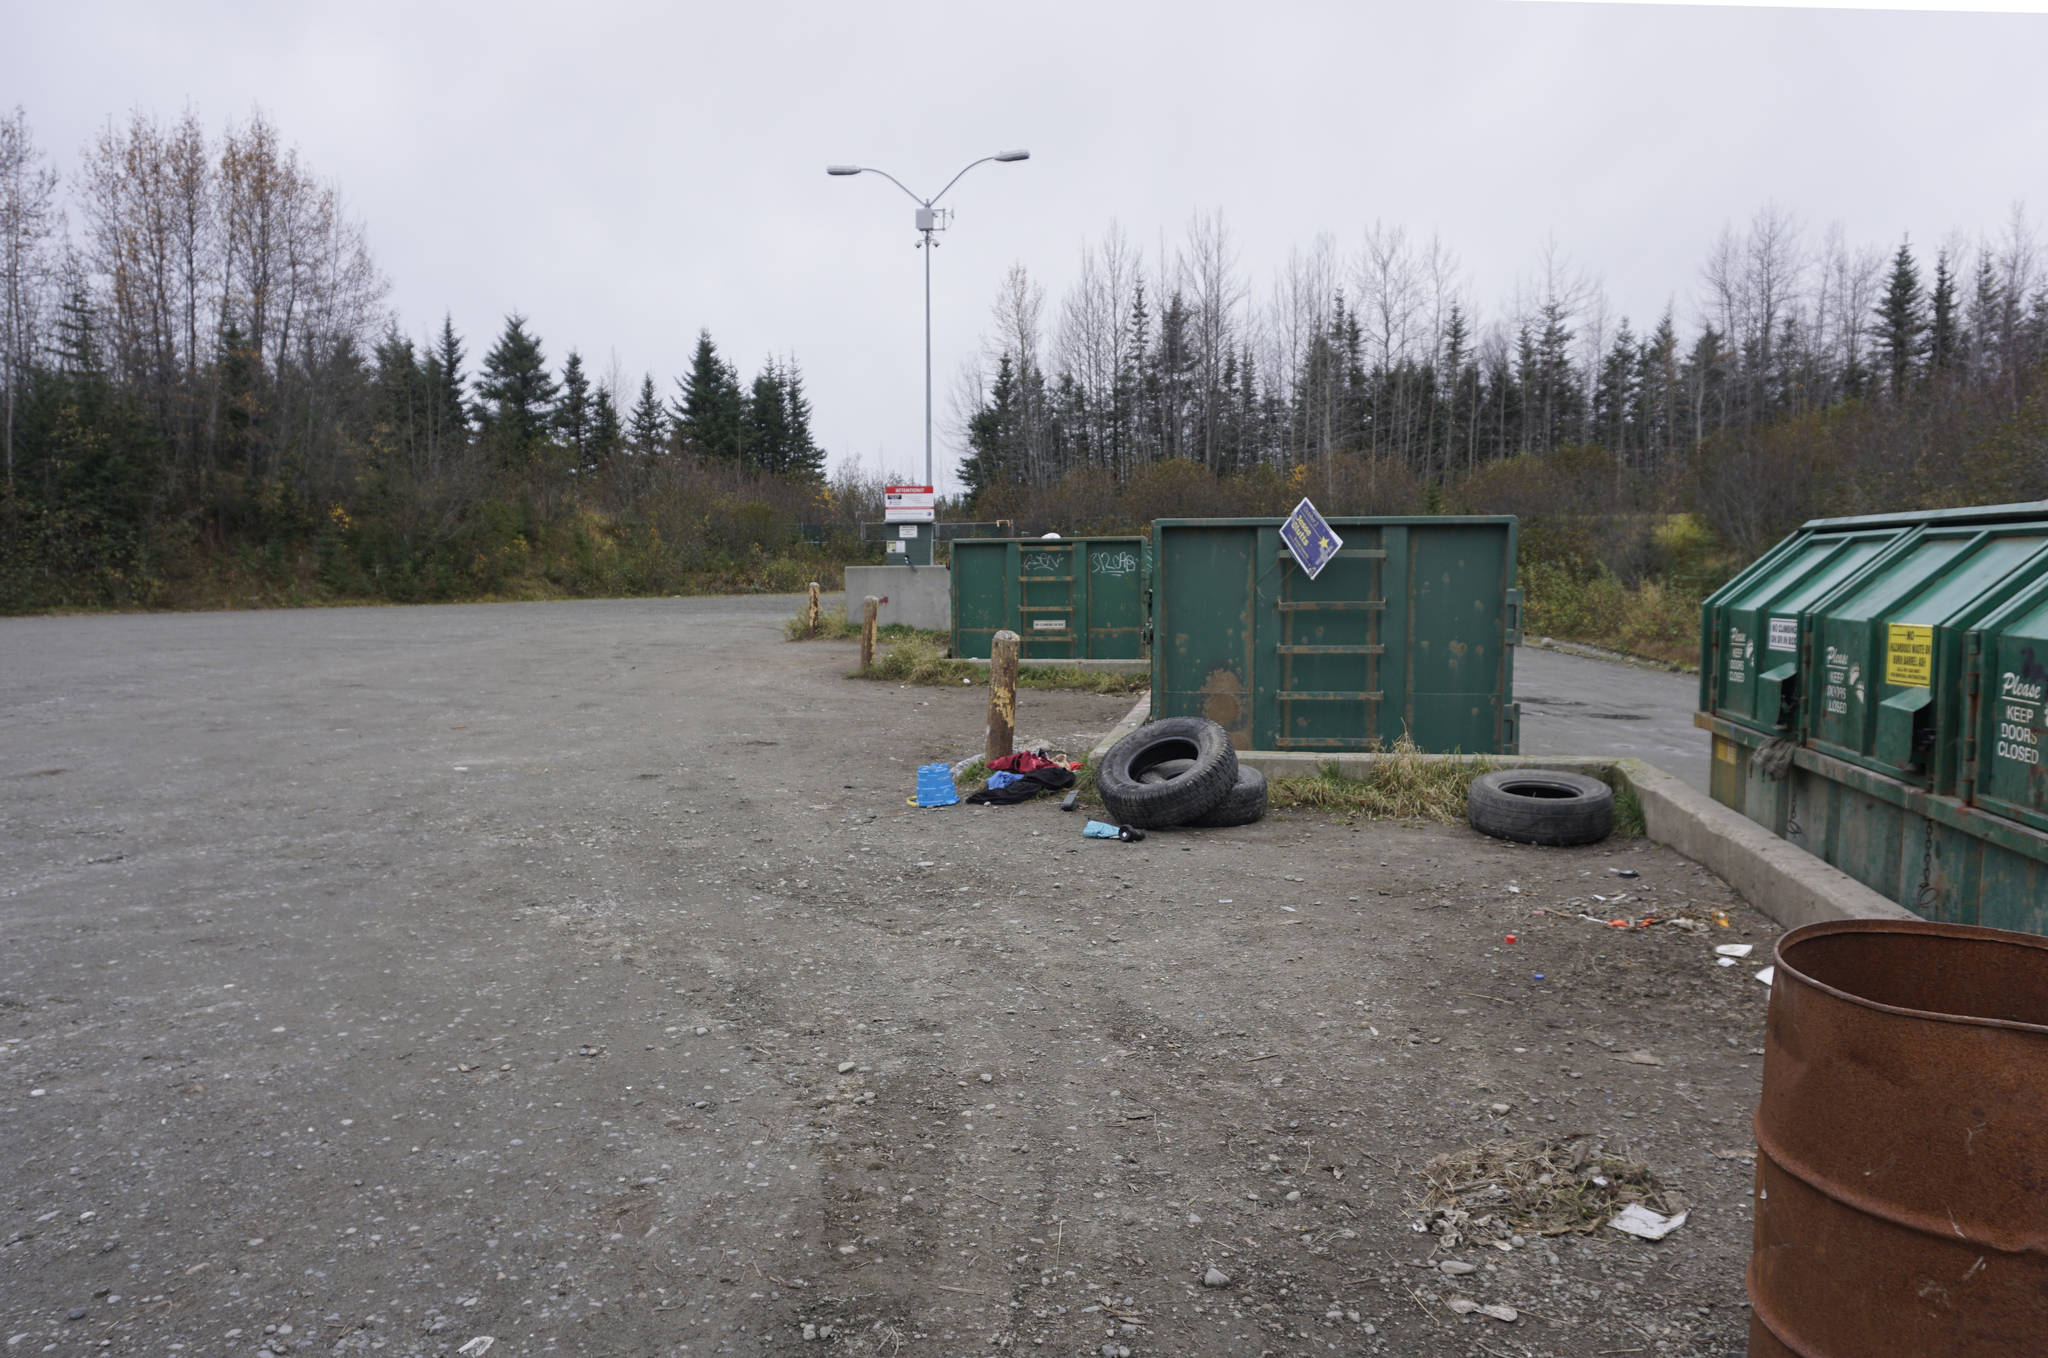 The Kenai Peninsula Borough waste transfer site in Anchor Point is on borough land proposed to be leased for subsurface oil-and-gas rights to Hilcorp. The photo was taken on Oct. 19, 2018. (Photo by Michael Armstrong/Homer News)                                The Kenai Peninsula Borough waste transfer site in Anchor Point is on borough land proposed to be leased for subsurface oil-and-gas rights to Hilcorp. The photo was taken on Oct. 19, 2018. (Photo by Michael Armstrong/Homer News)